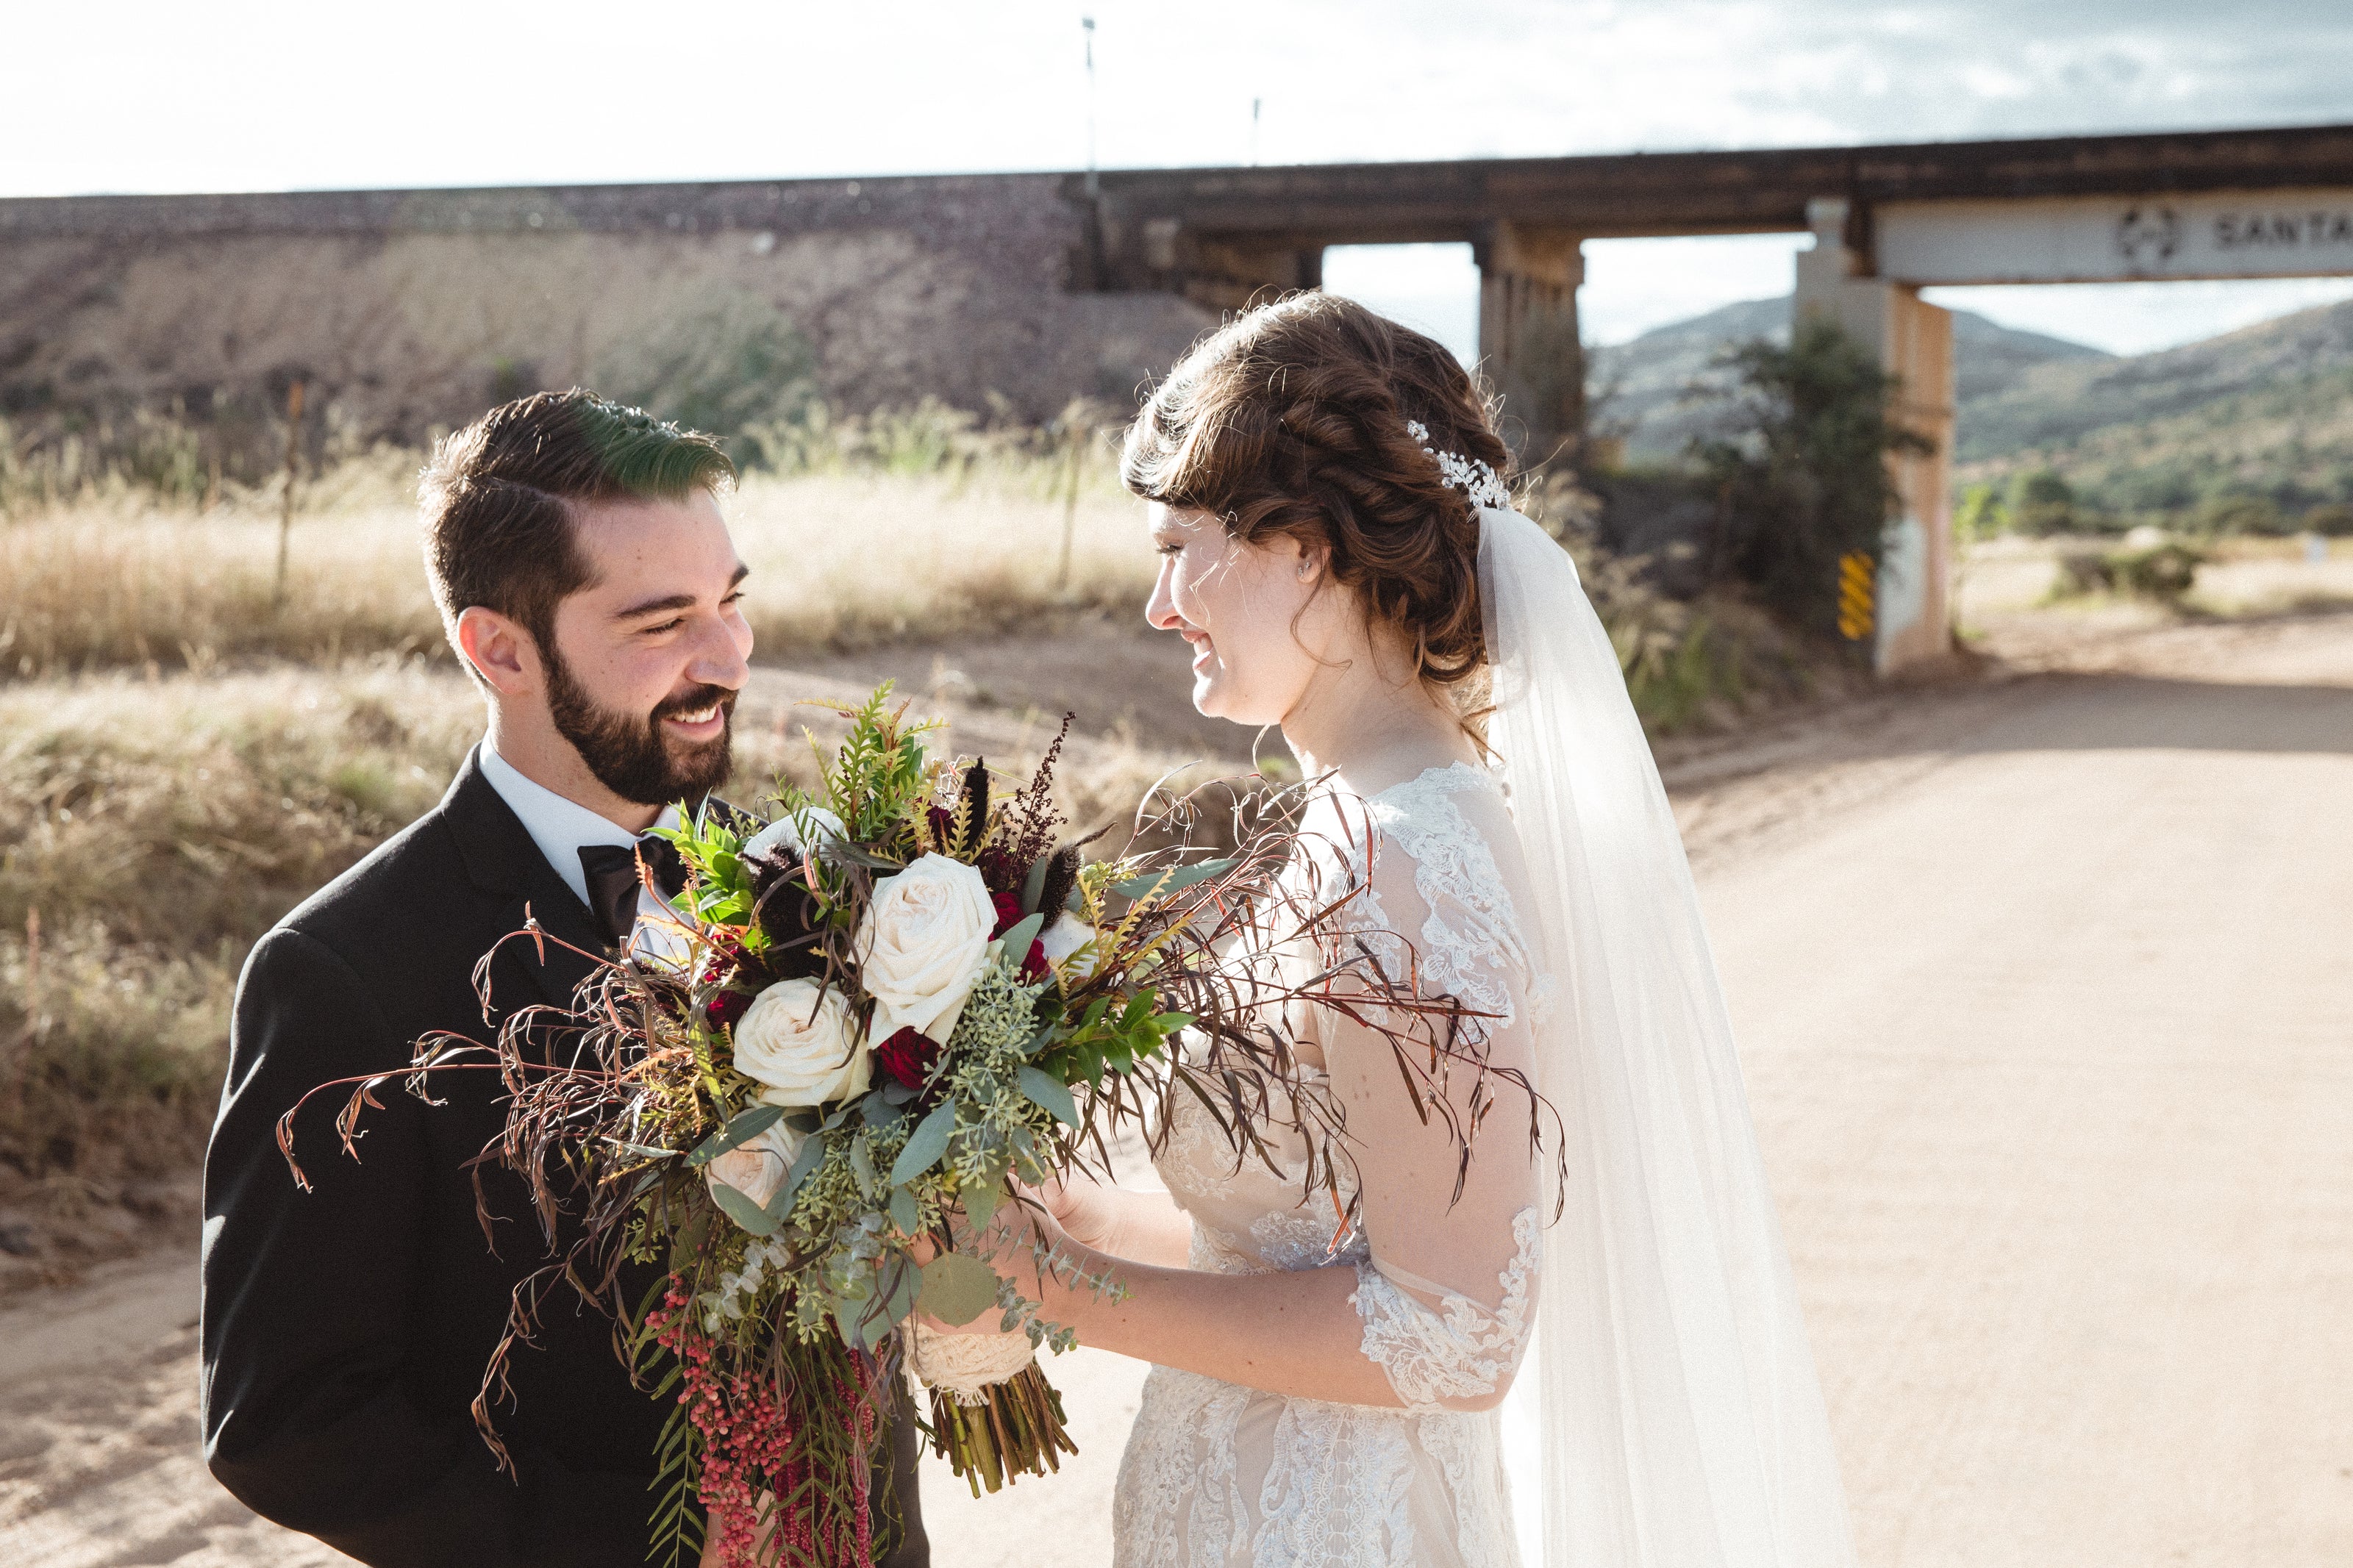 Bride and groom in Prescott Arizona, holding her bouquet containing fall colored flowers